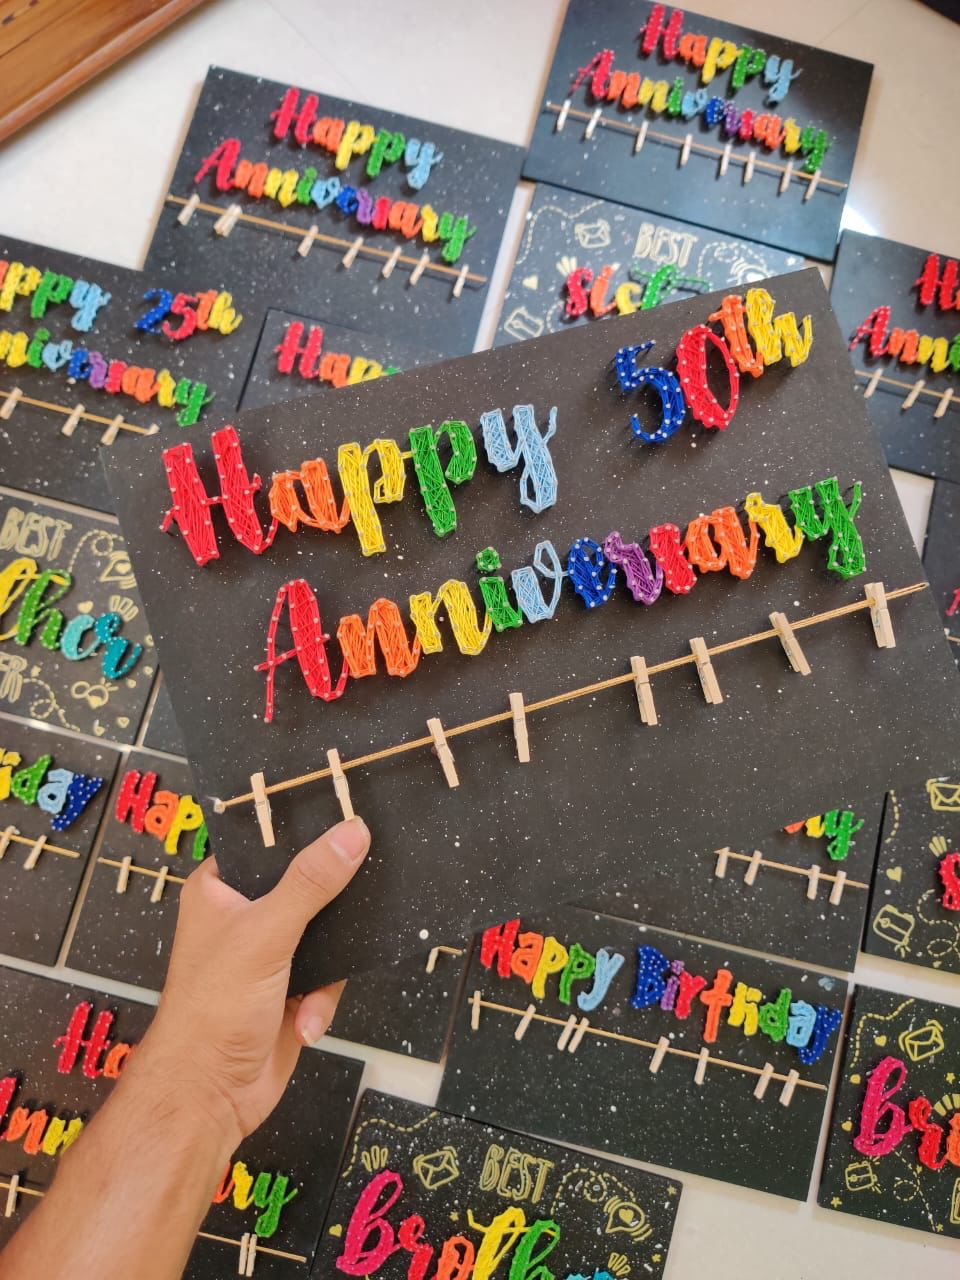 Golden Jubilee: Celebrating 50 Years of Love with String Art